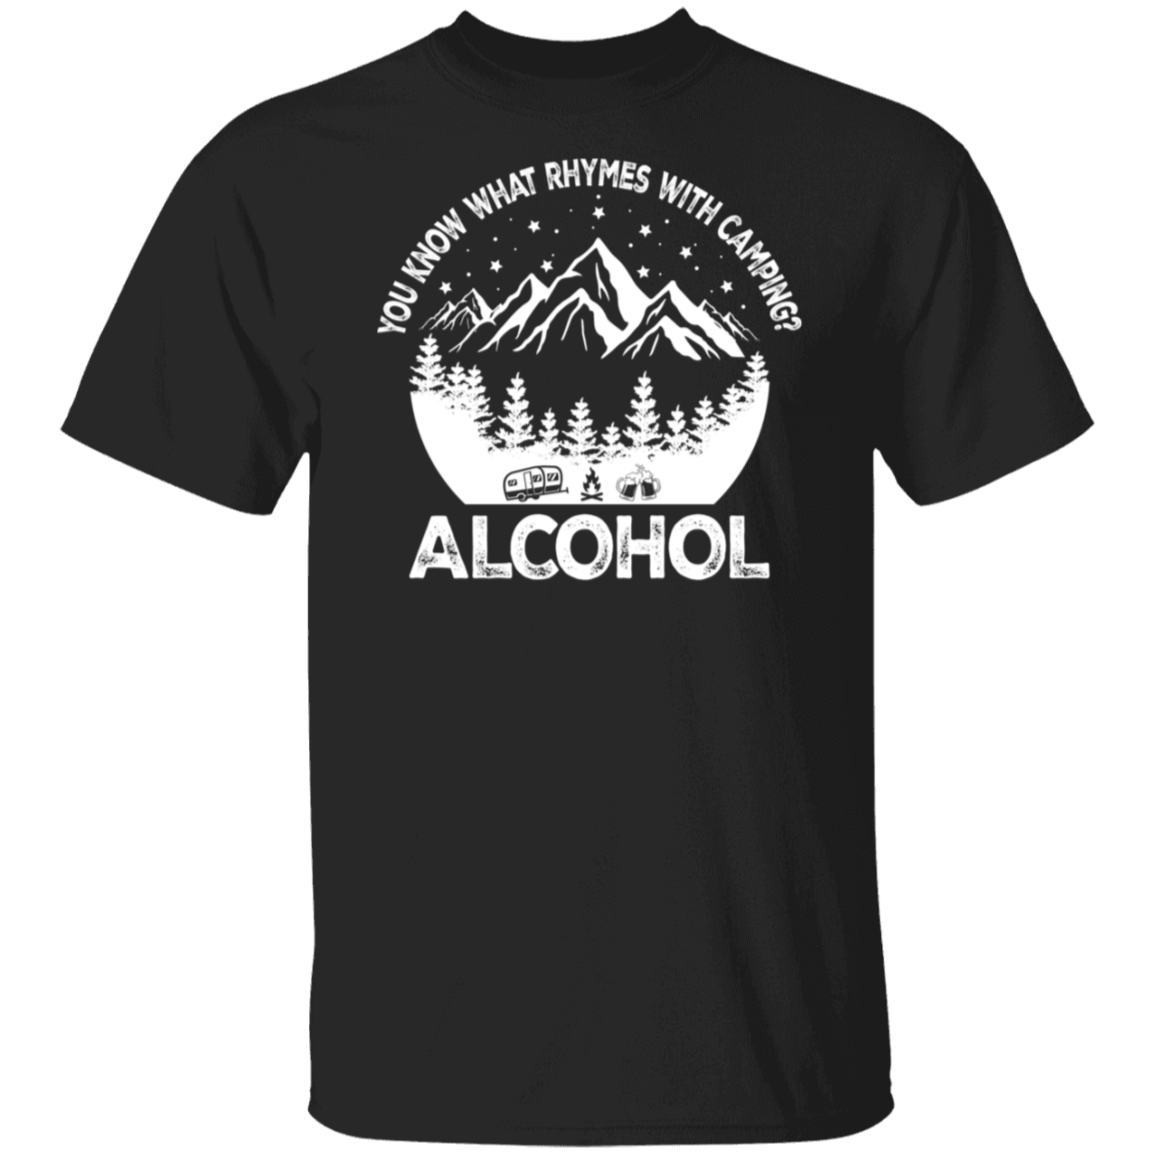 You Know What Rhymes With Camping Alcohol White Print T-Shirt